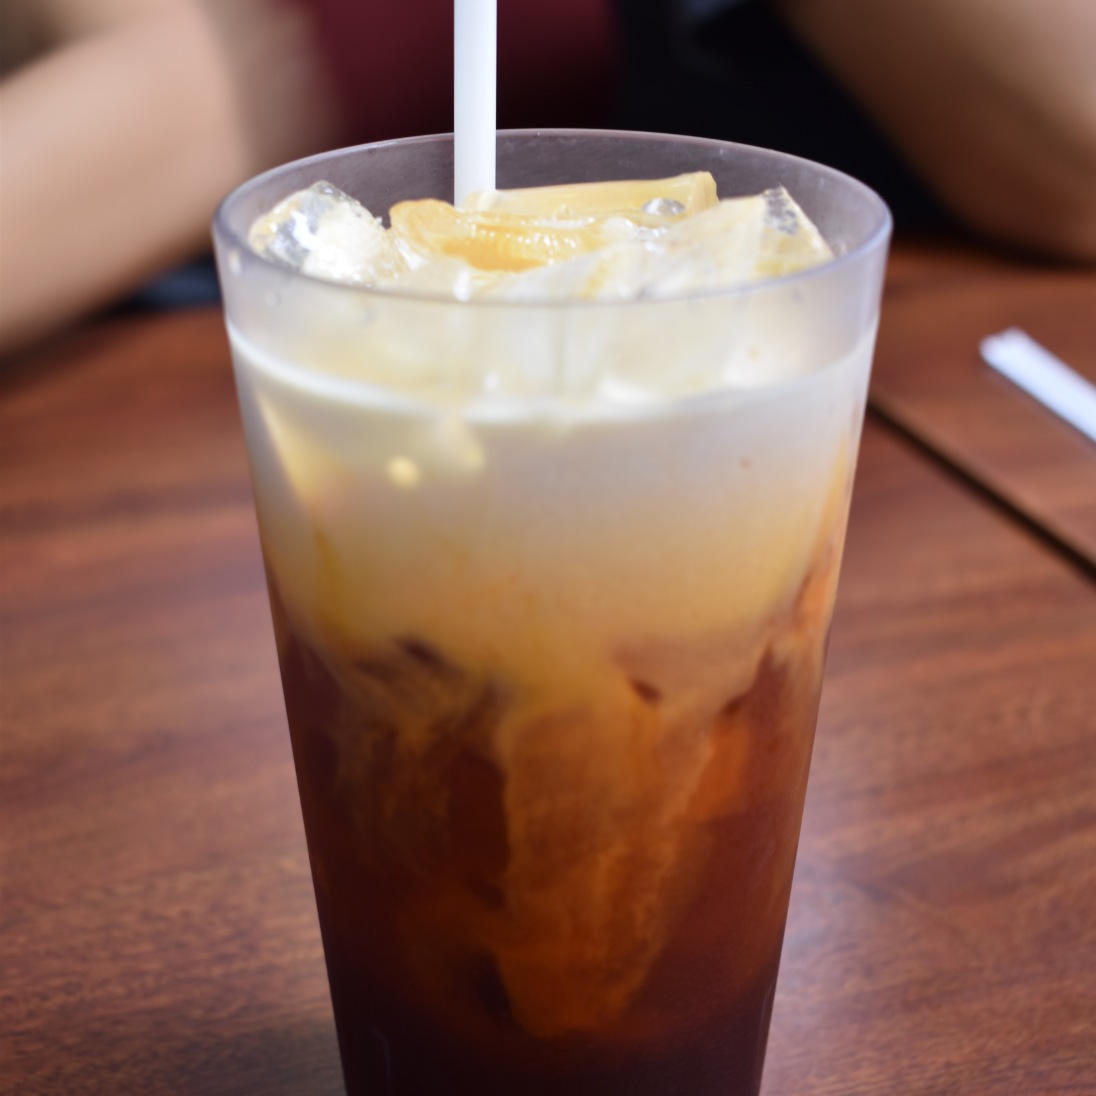 A favorite drink of many, this creamy yet refreshing tea is found at many Thai restaurants.